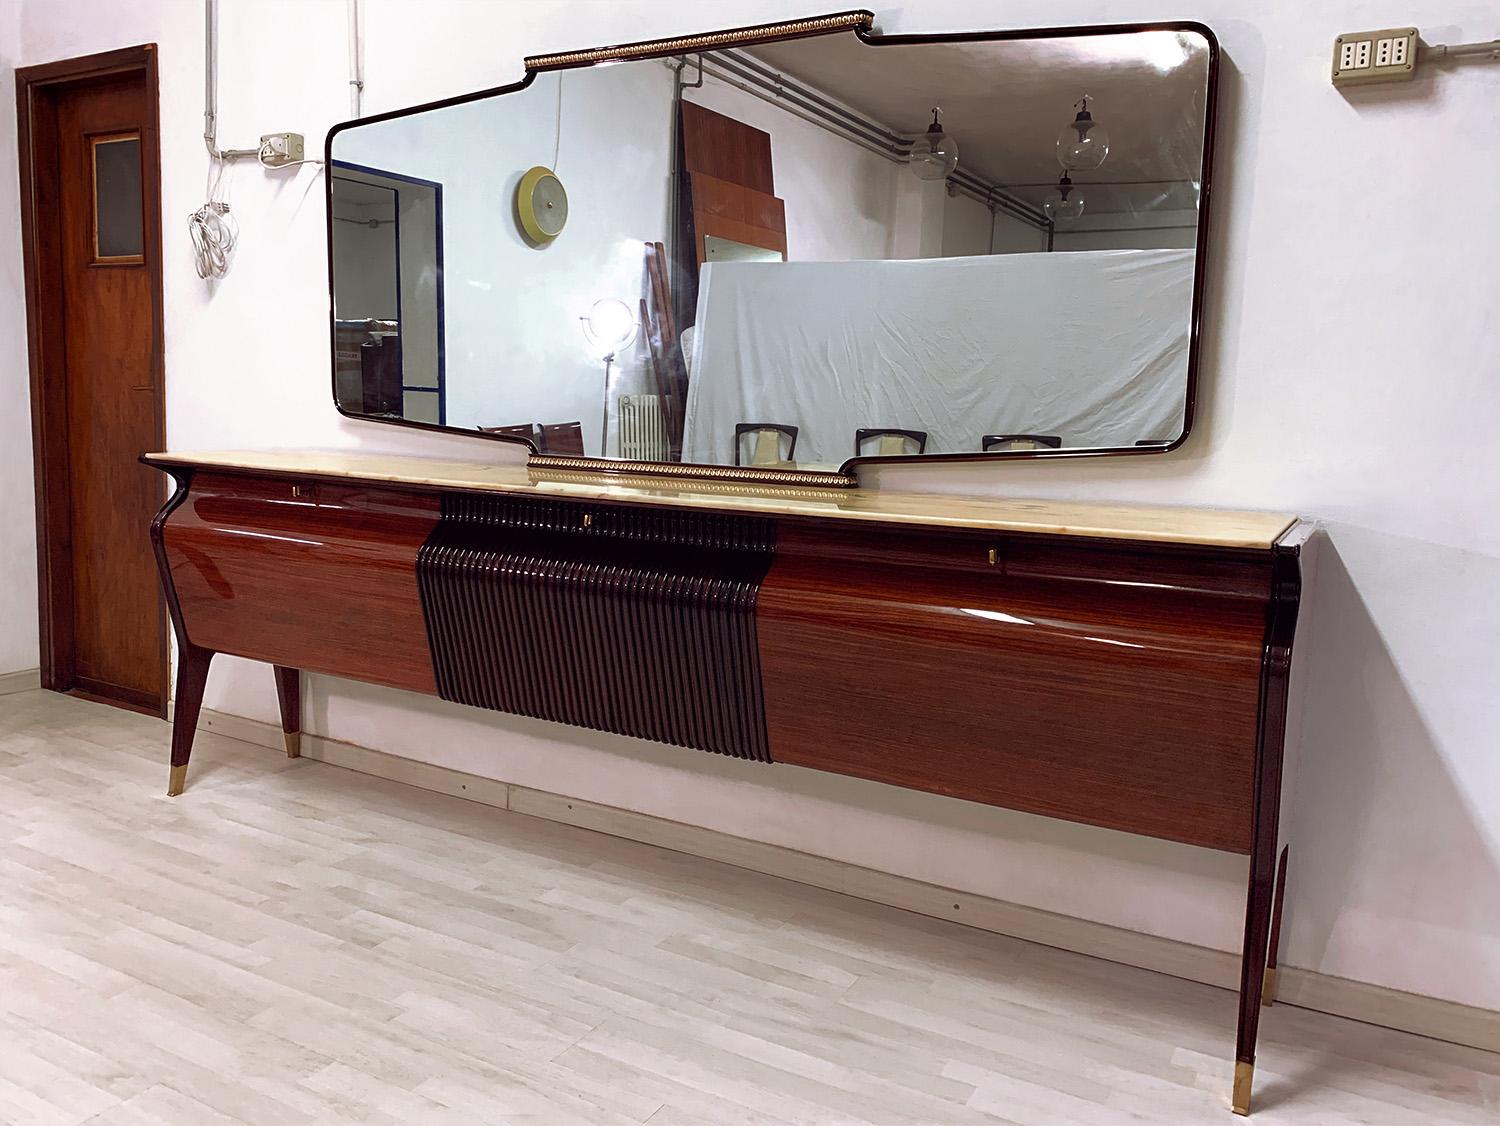 Impressive Sideboard and/or Buffet with mirror designed by Osvaldo Borsani in the 1950s.
Its structure is made of rosewood, characterized by a unique shape design, given by its sinuous frontal profile equipped with three drop-down doors.
Very